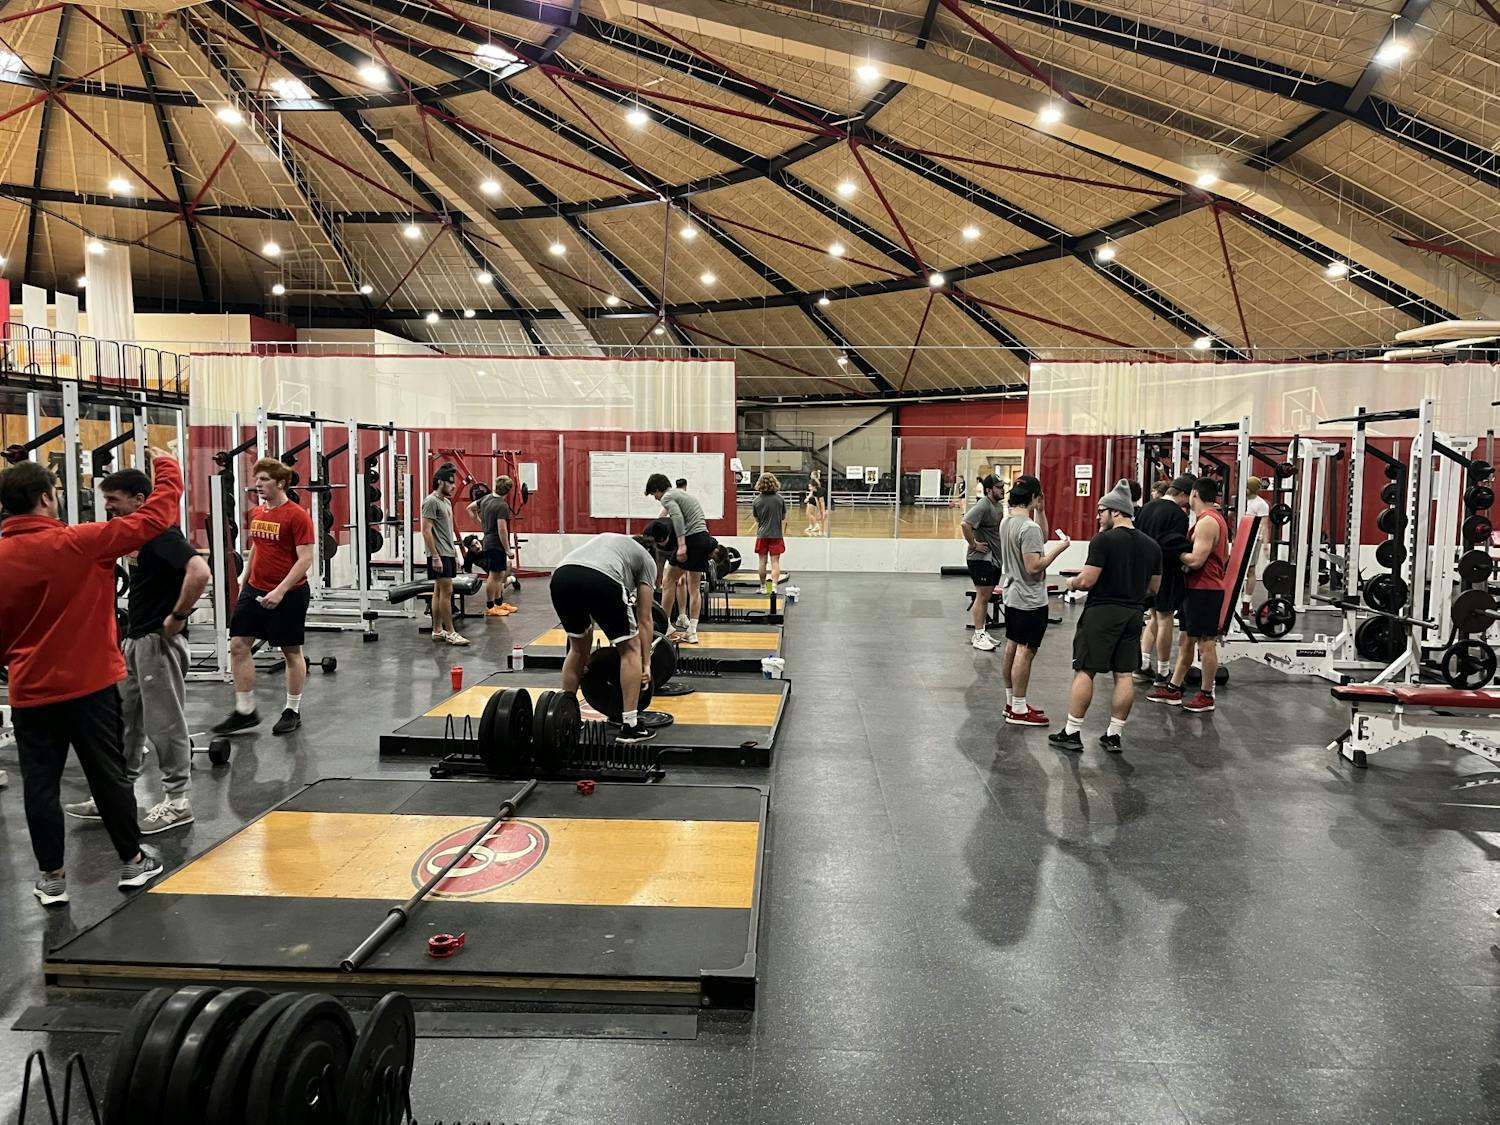 A group of people stand in the Rike Center weight room, either talking or actively using equipment.